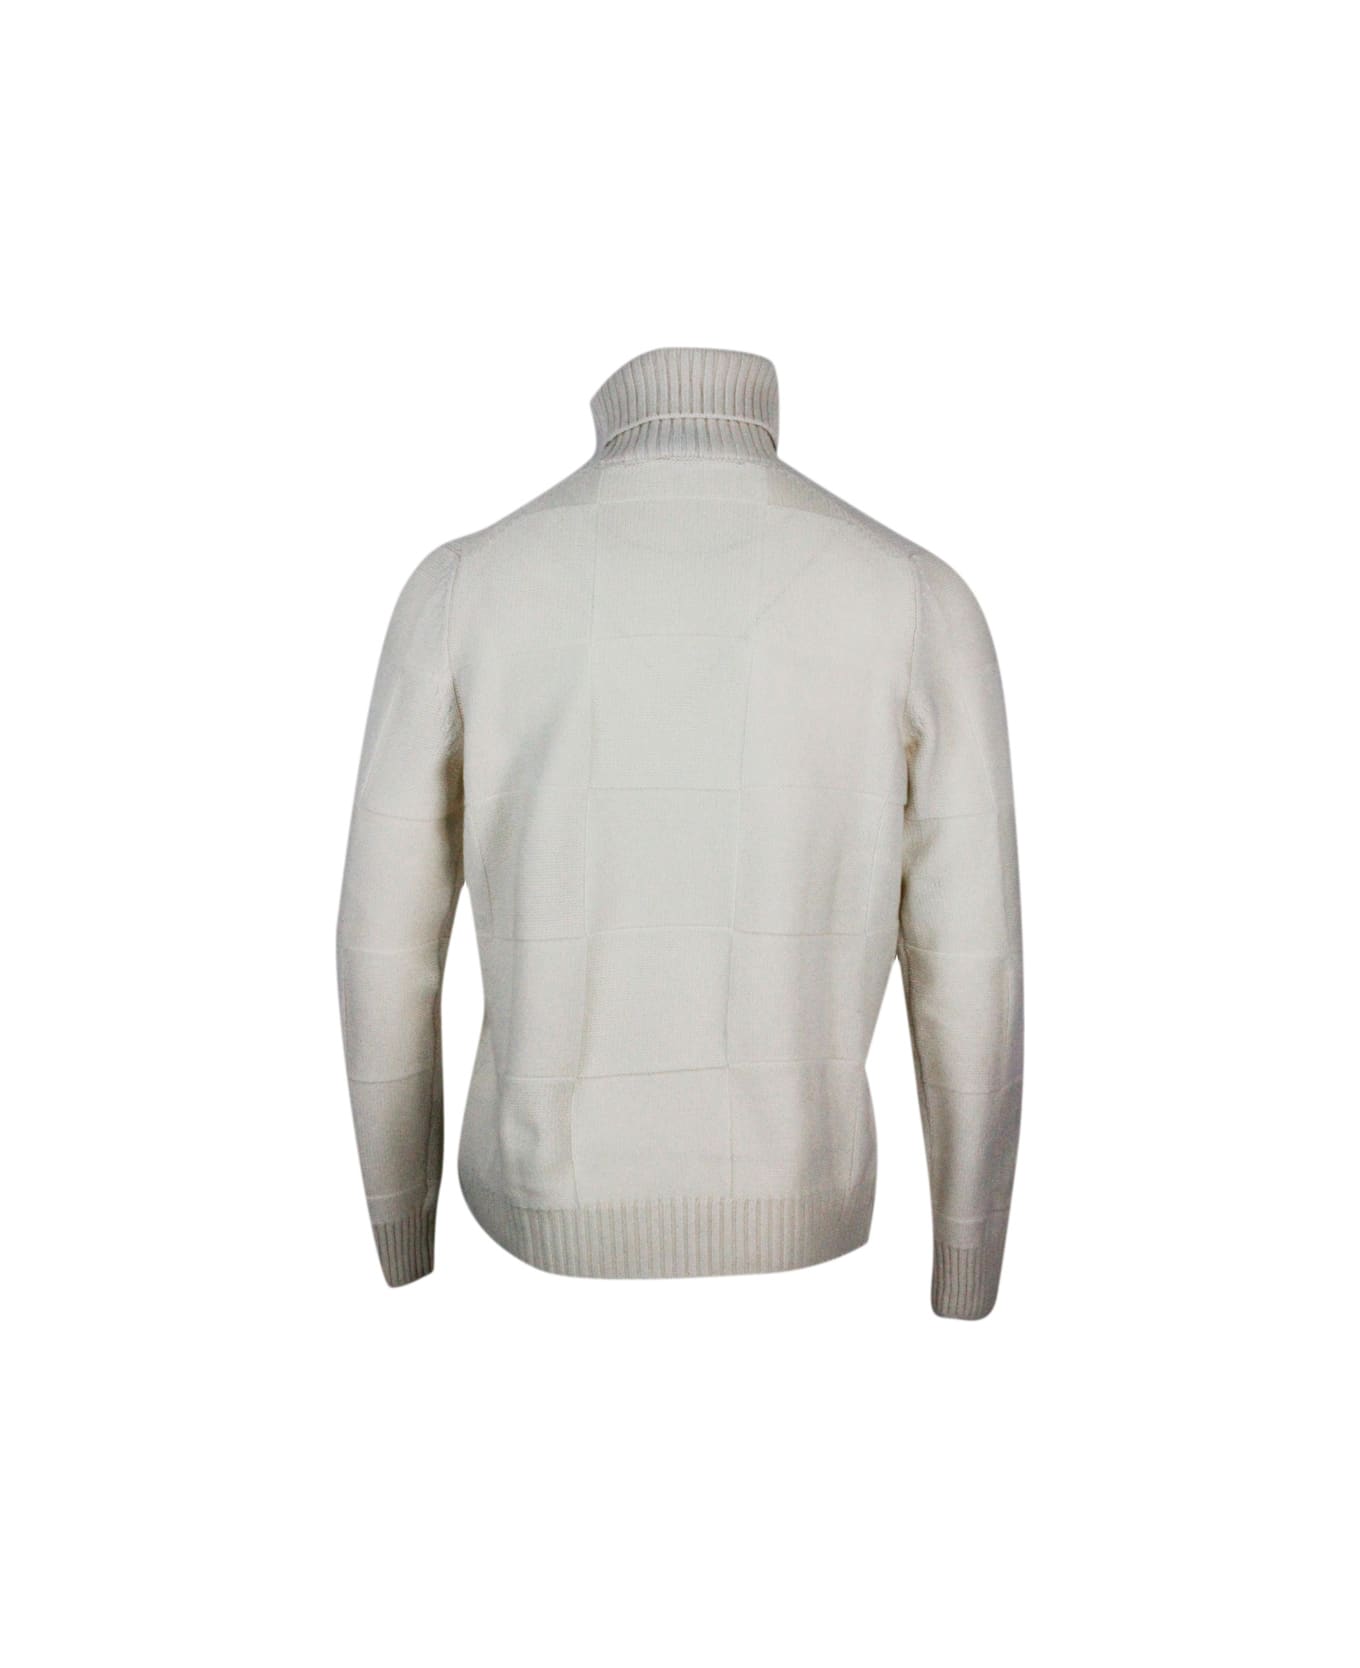 Barba Napoli Turtleneck Sweater In Pure And Soft Cashmere With Alternating Embossed Squares - White ニットウェア